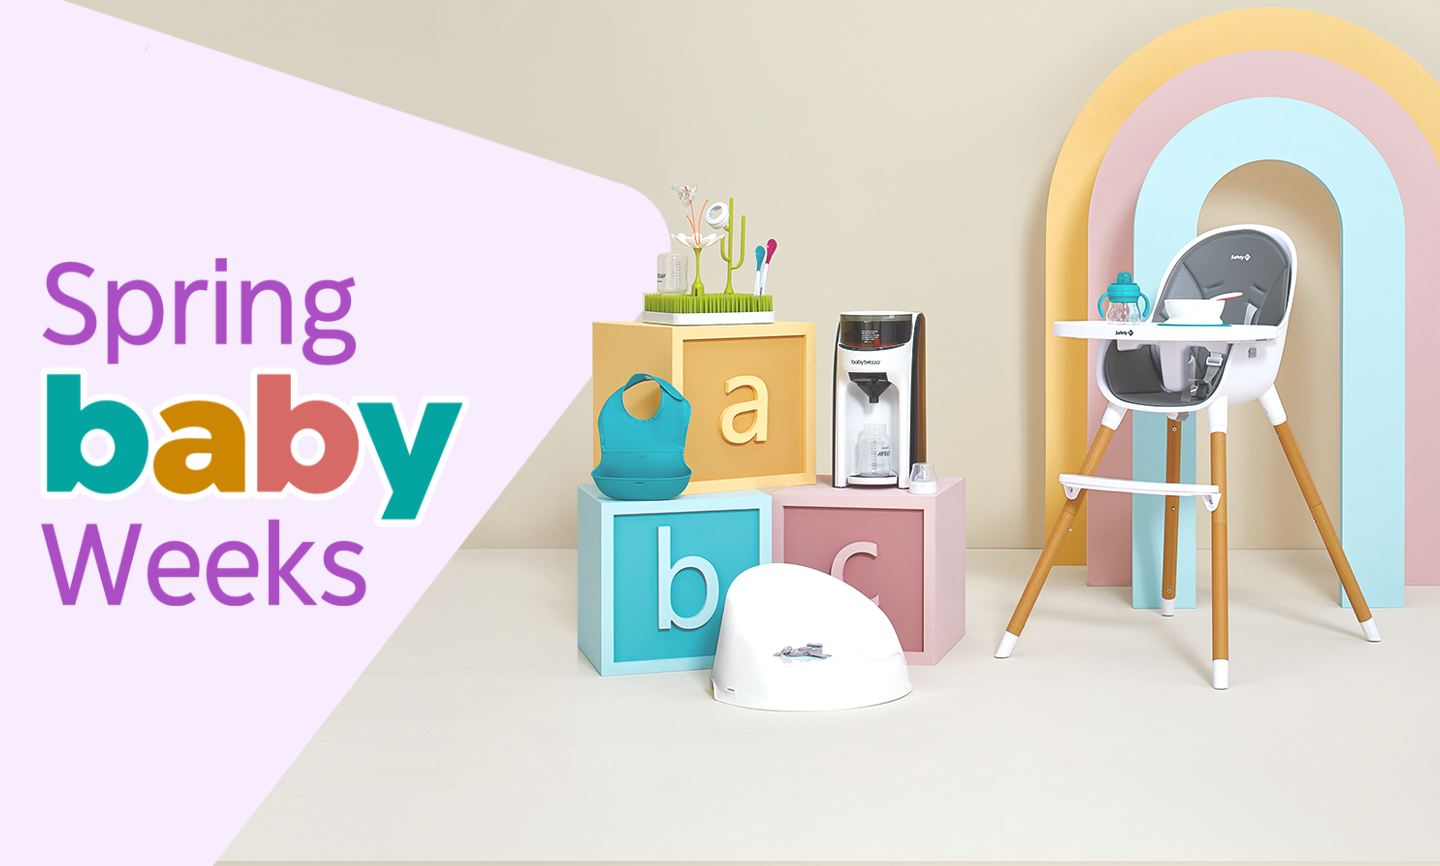 A selection of baby products displayed on and around three giant letter blocks.